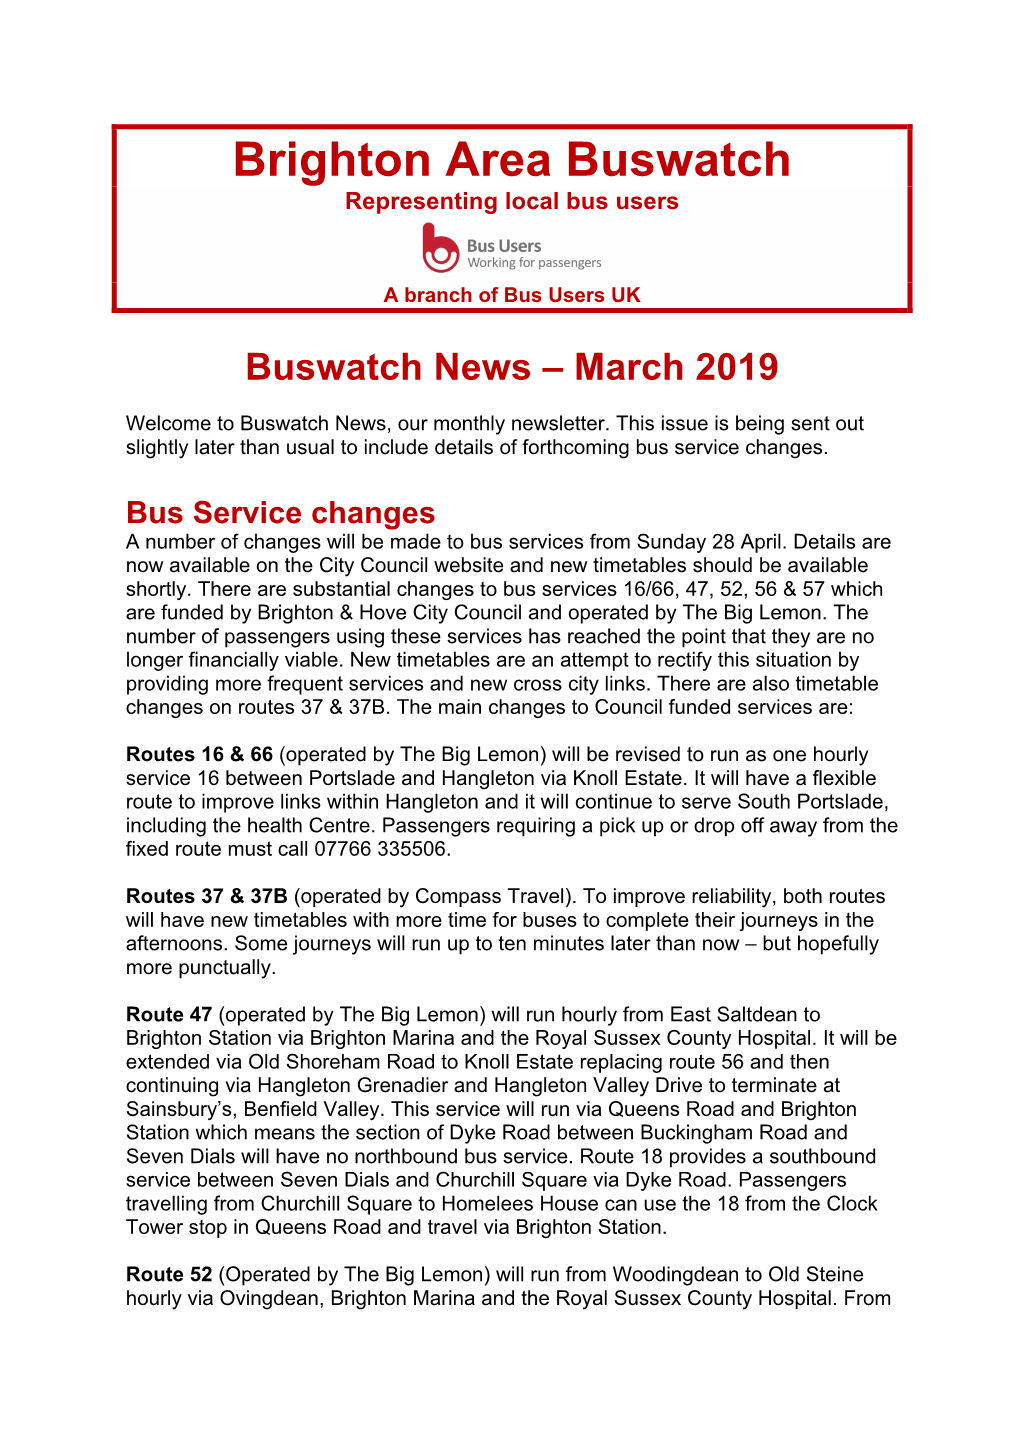 Brighton Area Buswatch Meeting the Next Meeting with Bus Company Managers and Brighton & Hove City Council Will Be at 5Pm on Wednesday 10 April in Brighton Town Hall